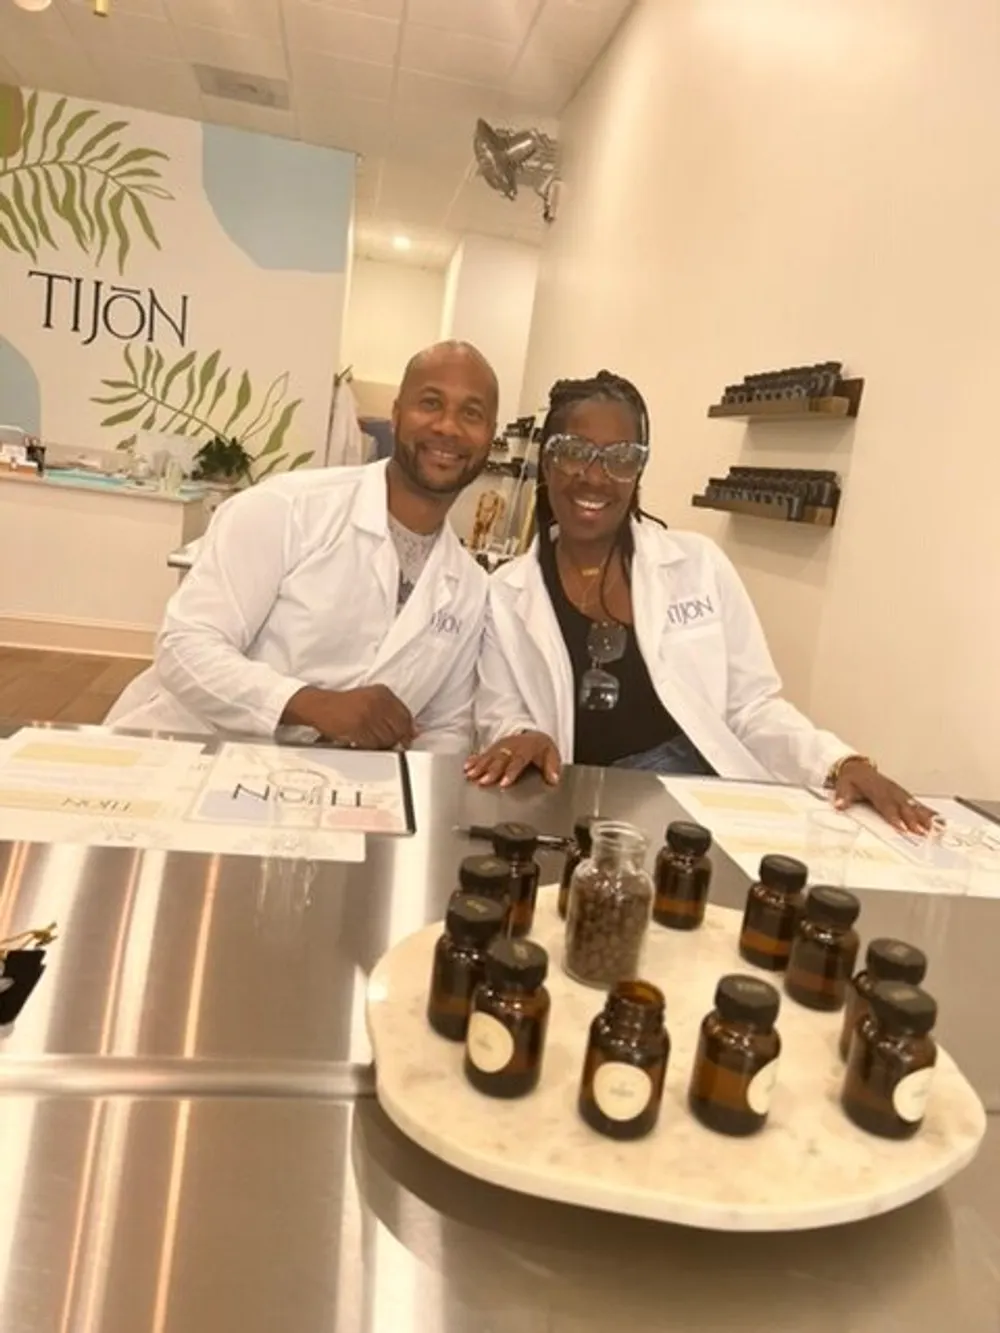 Two smiling individuals in lab coats are seated behind a counter with small bottles of what appear to be fragrance ingredients in a boutique with the name TIJON in the background